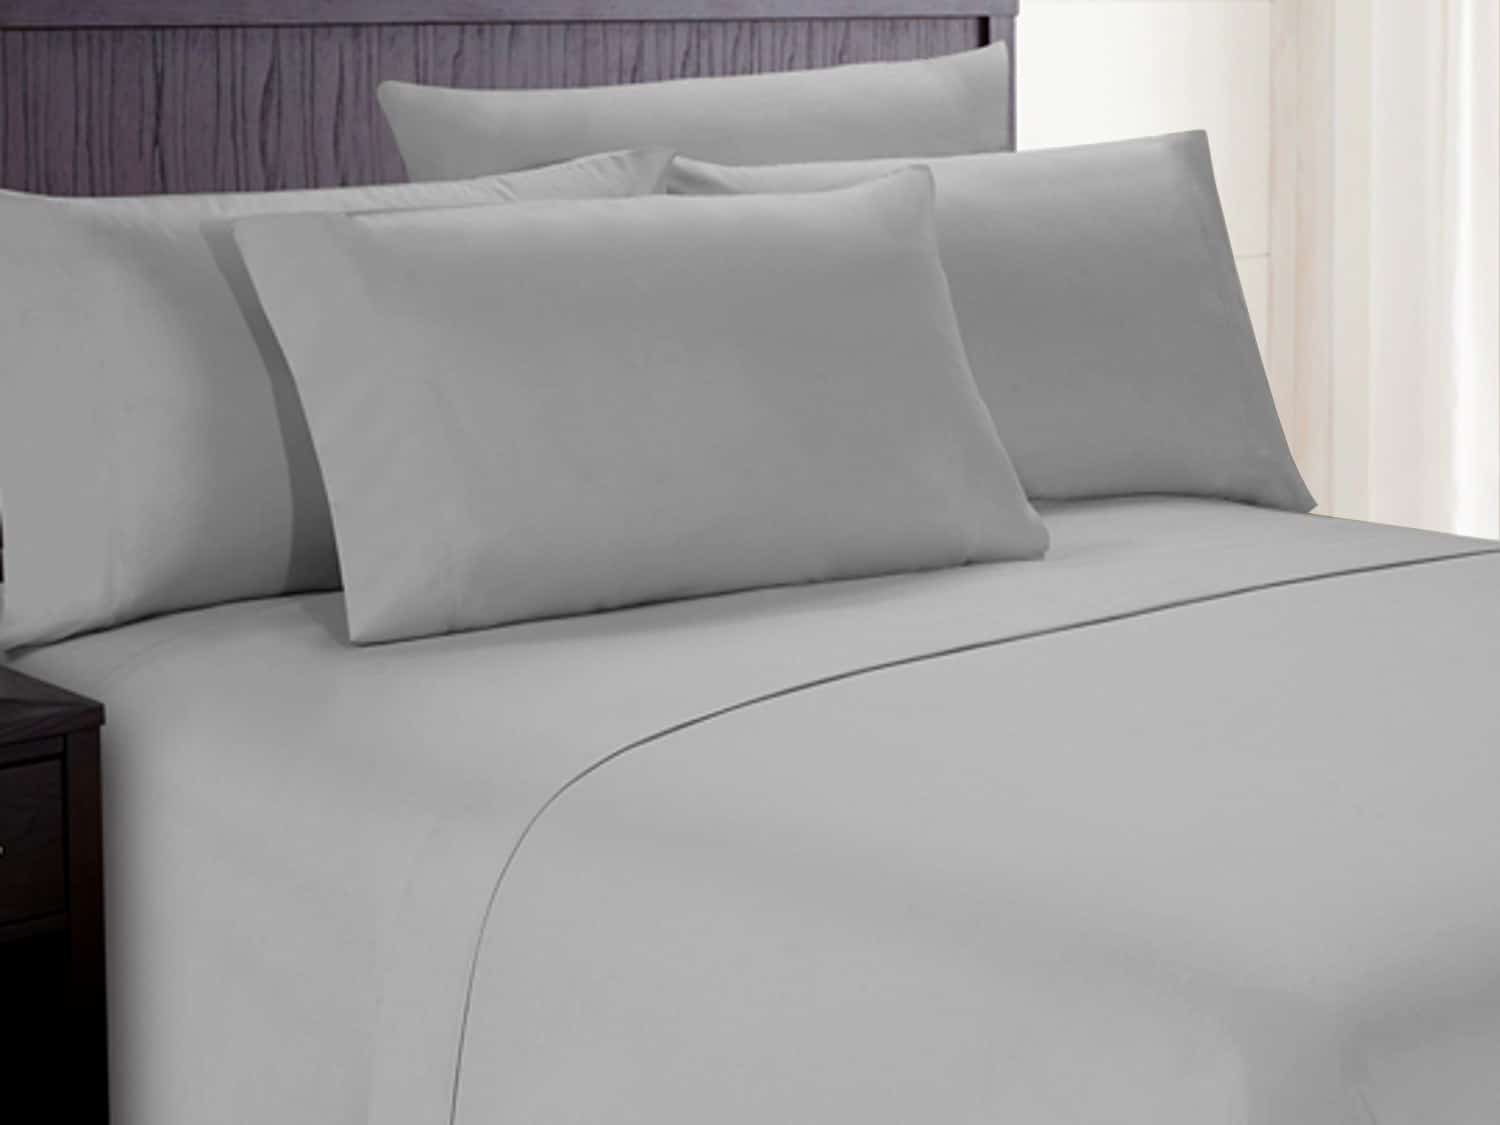 cotton bed sheets combo offer snapdeal